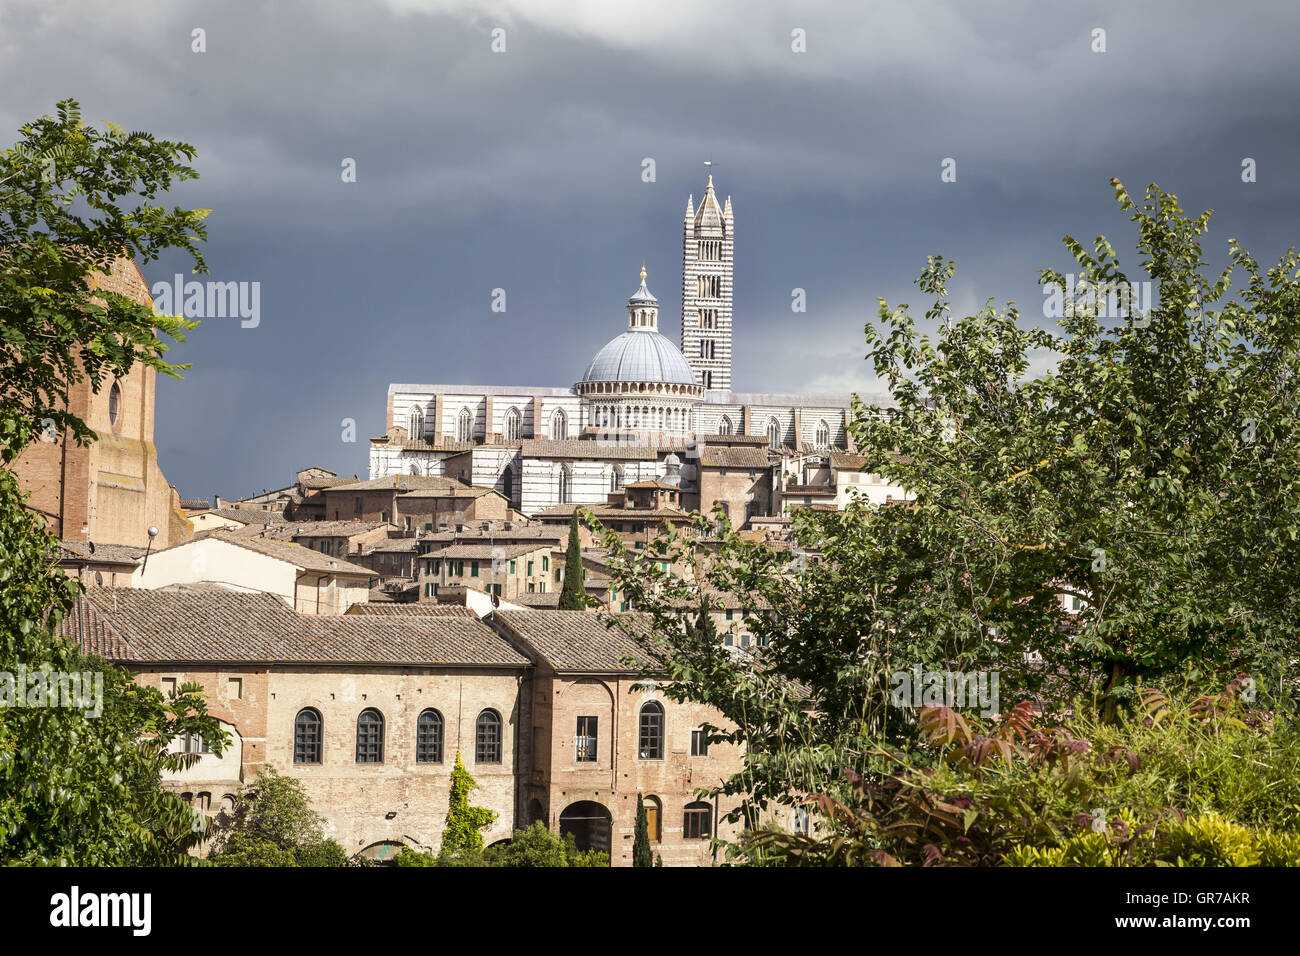 Sienna, Cathedral Cattedrale Di Santa Maria Assunta With Old Town, Tuscany, Italy Stock Photo